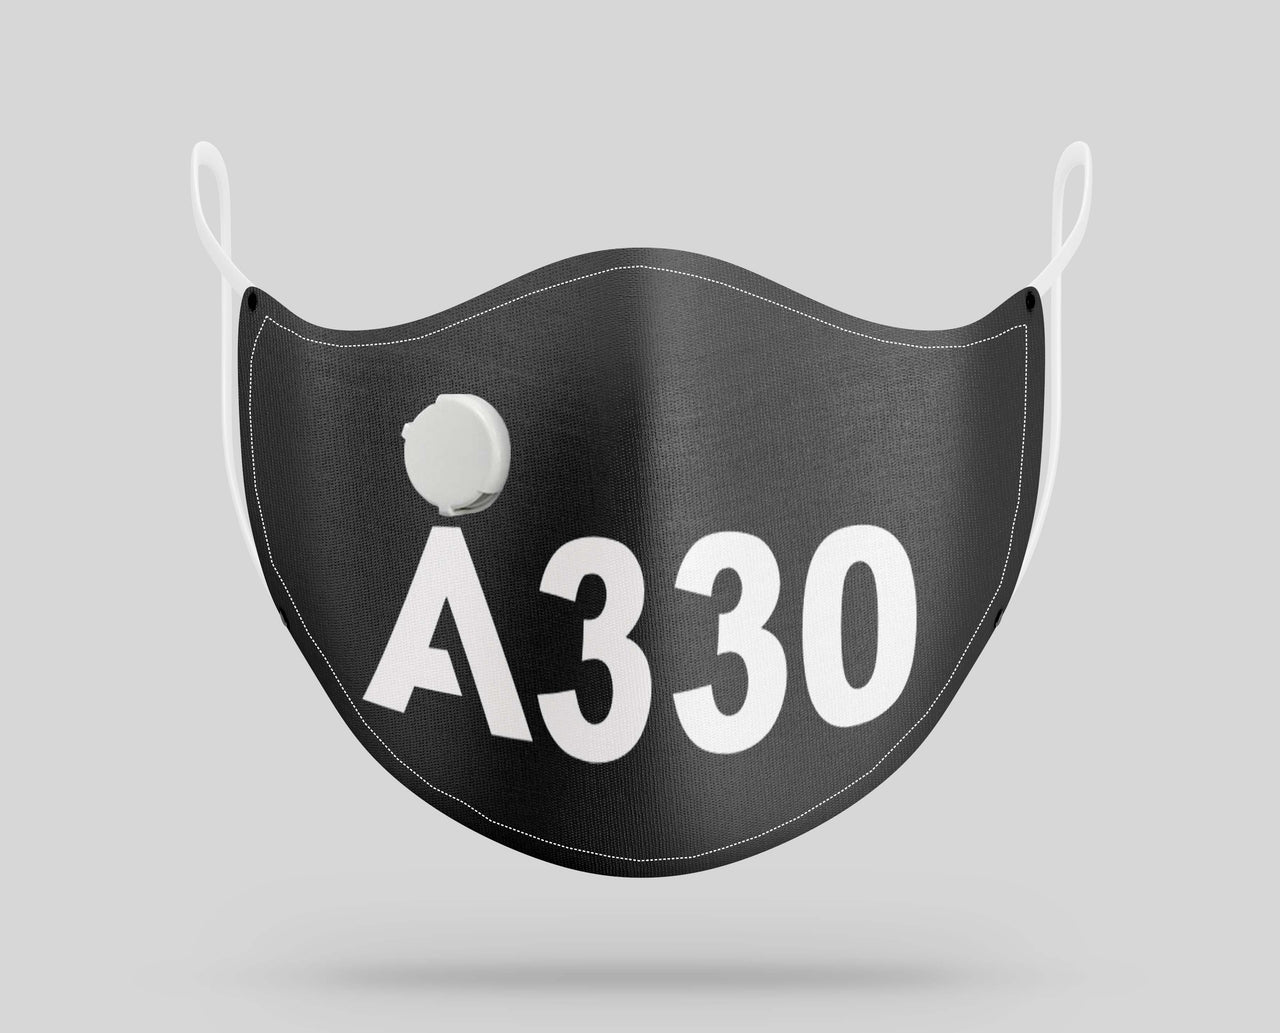 Airbus A330 Text Designed Face Masks